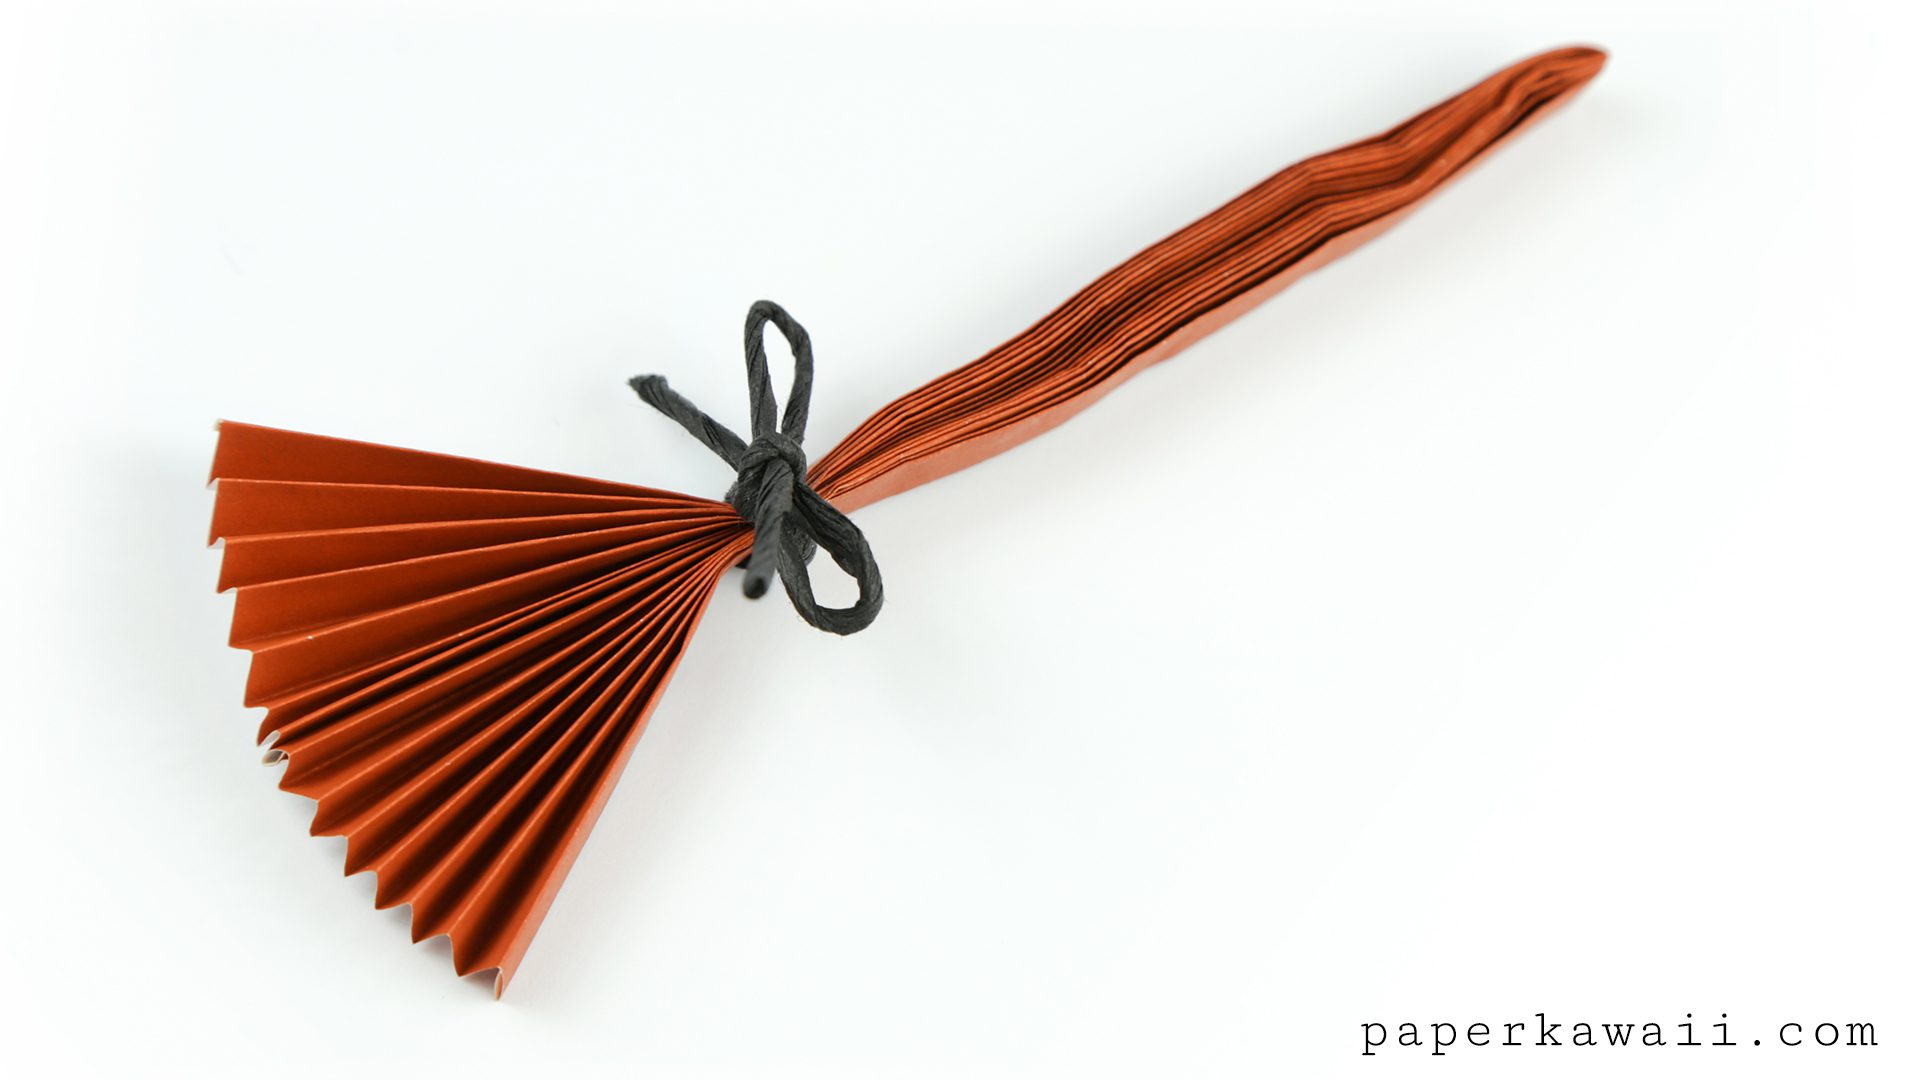 Easy Origami Broomstick Tutorial For Halloween!